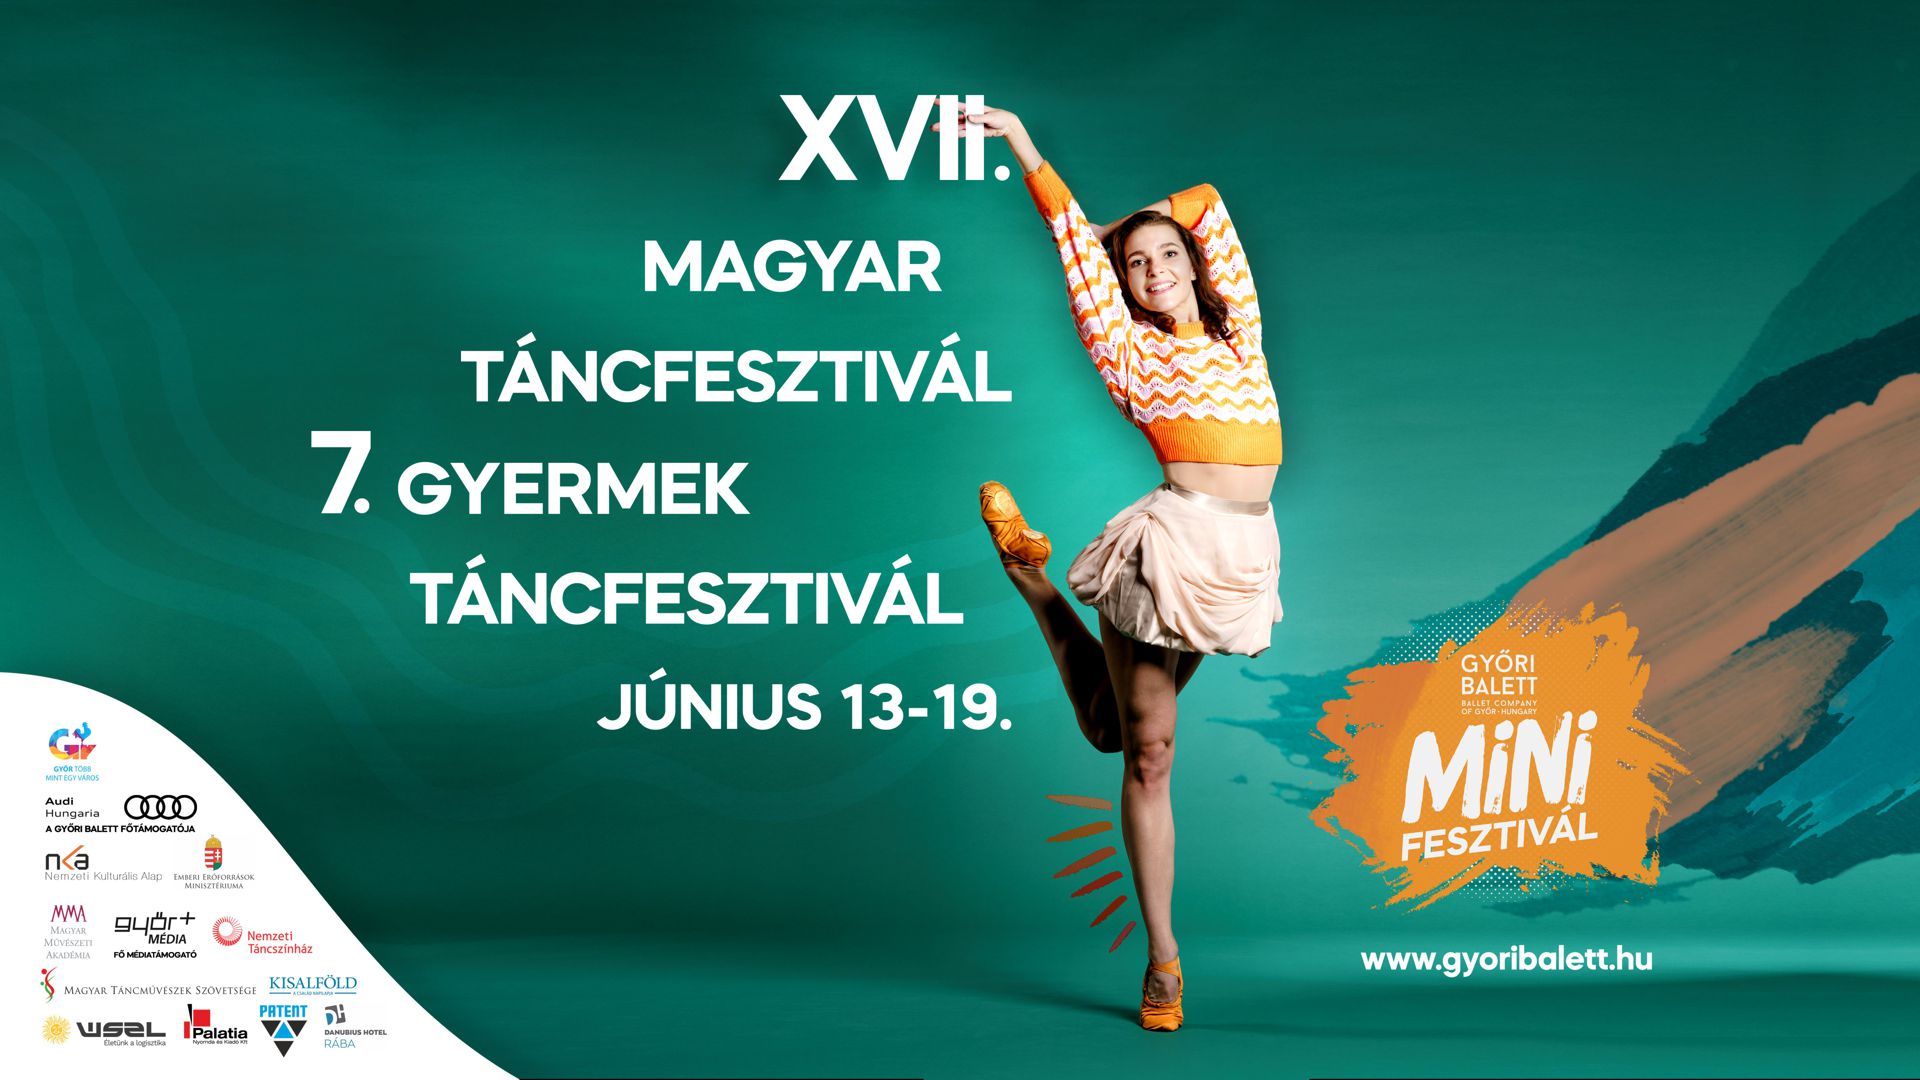 Starting Monday, Győr Is Once Again the Capital of Dance